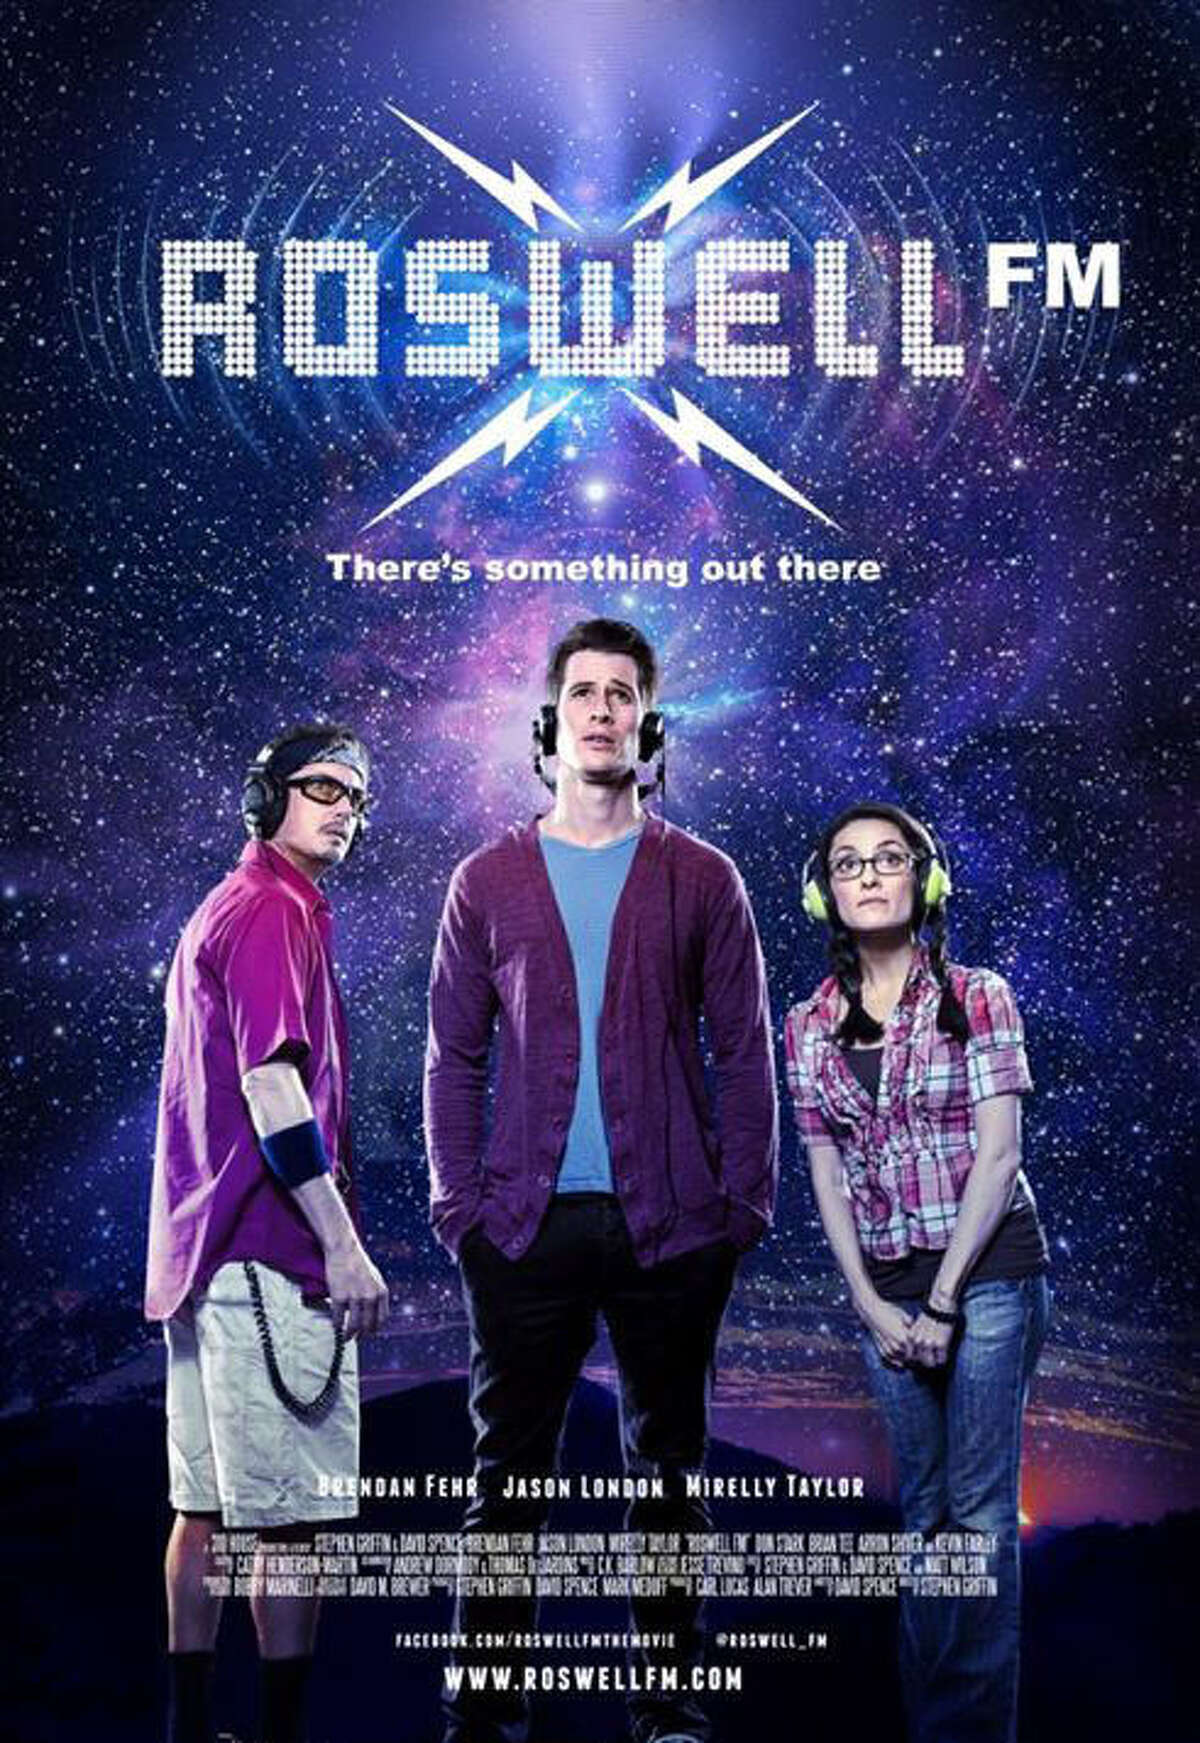 “Roswell FM” is a sci-fi comedy directed by Stephen Griffin, a graduate of North Texas State University.